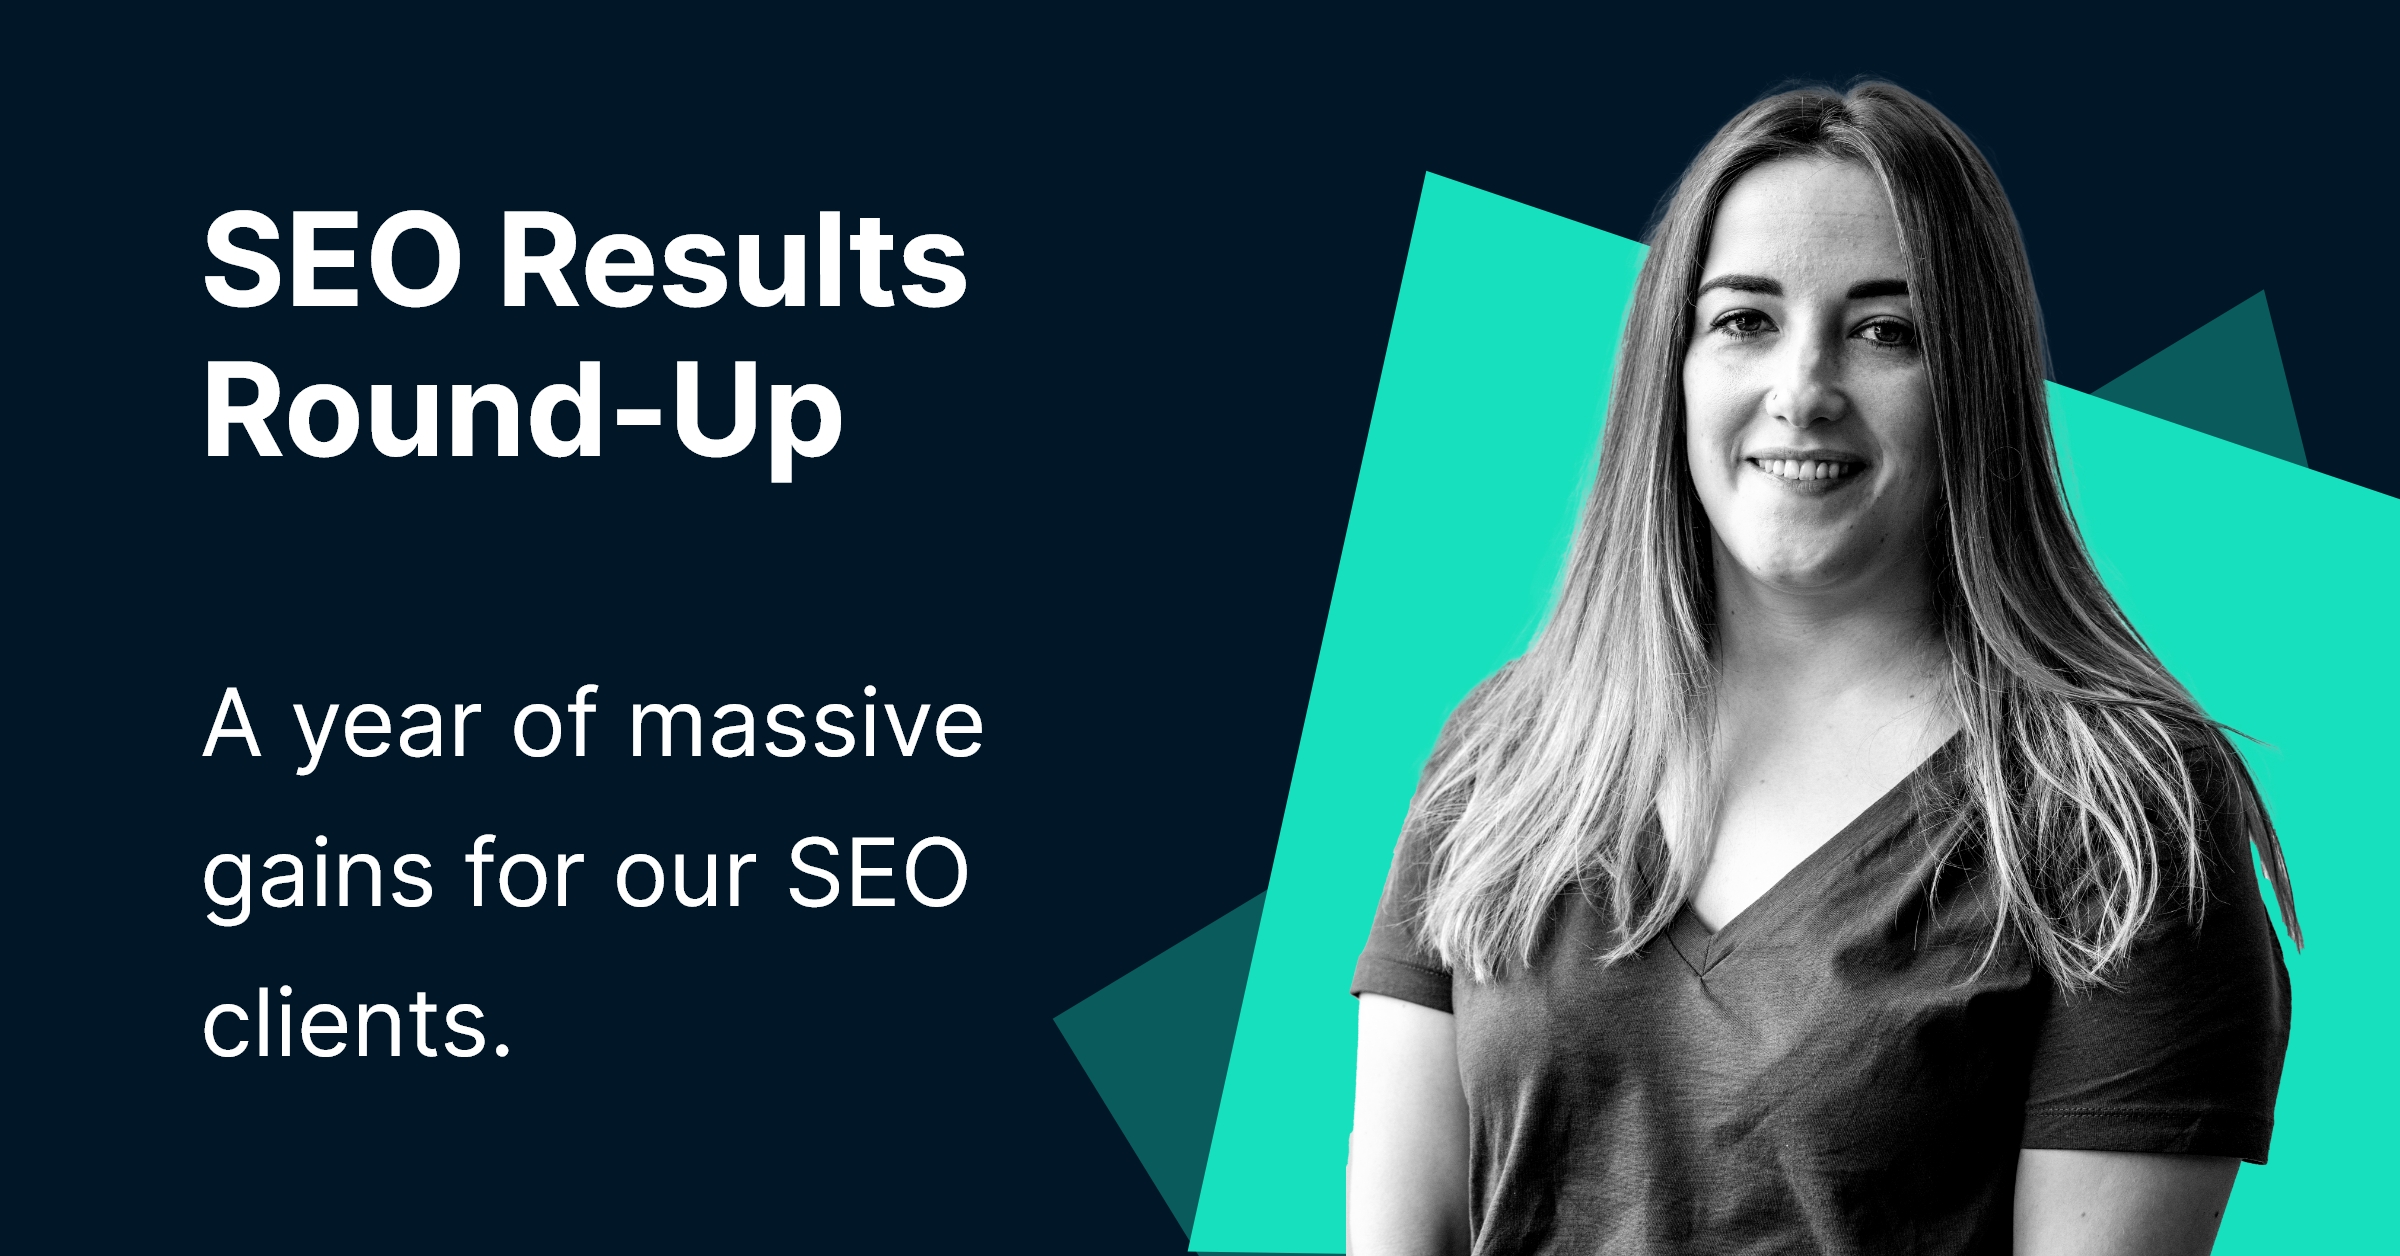 Real businesses, real results. A year of massive gains for our SEO clients